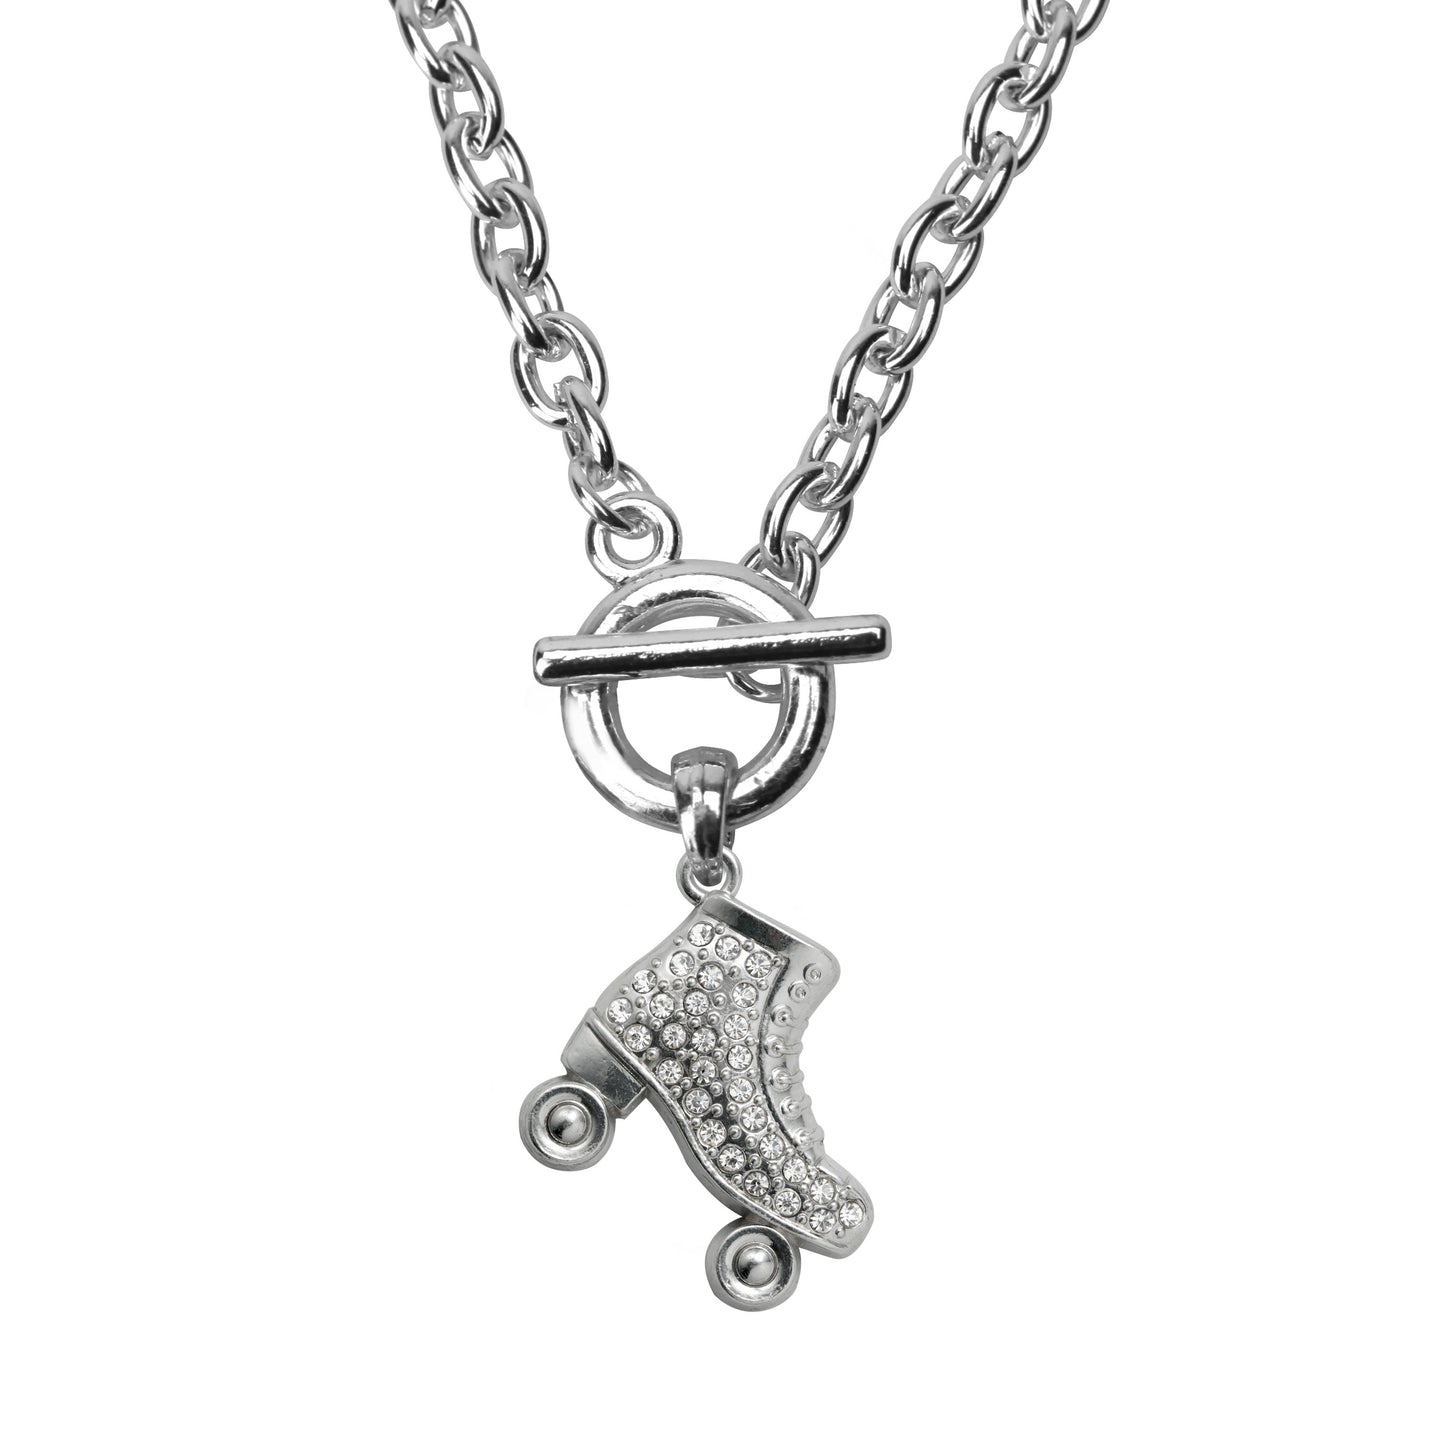 Silver Roller Skate Charm Toggle Necklace